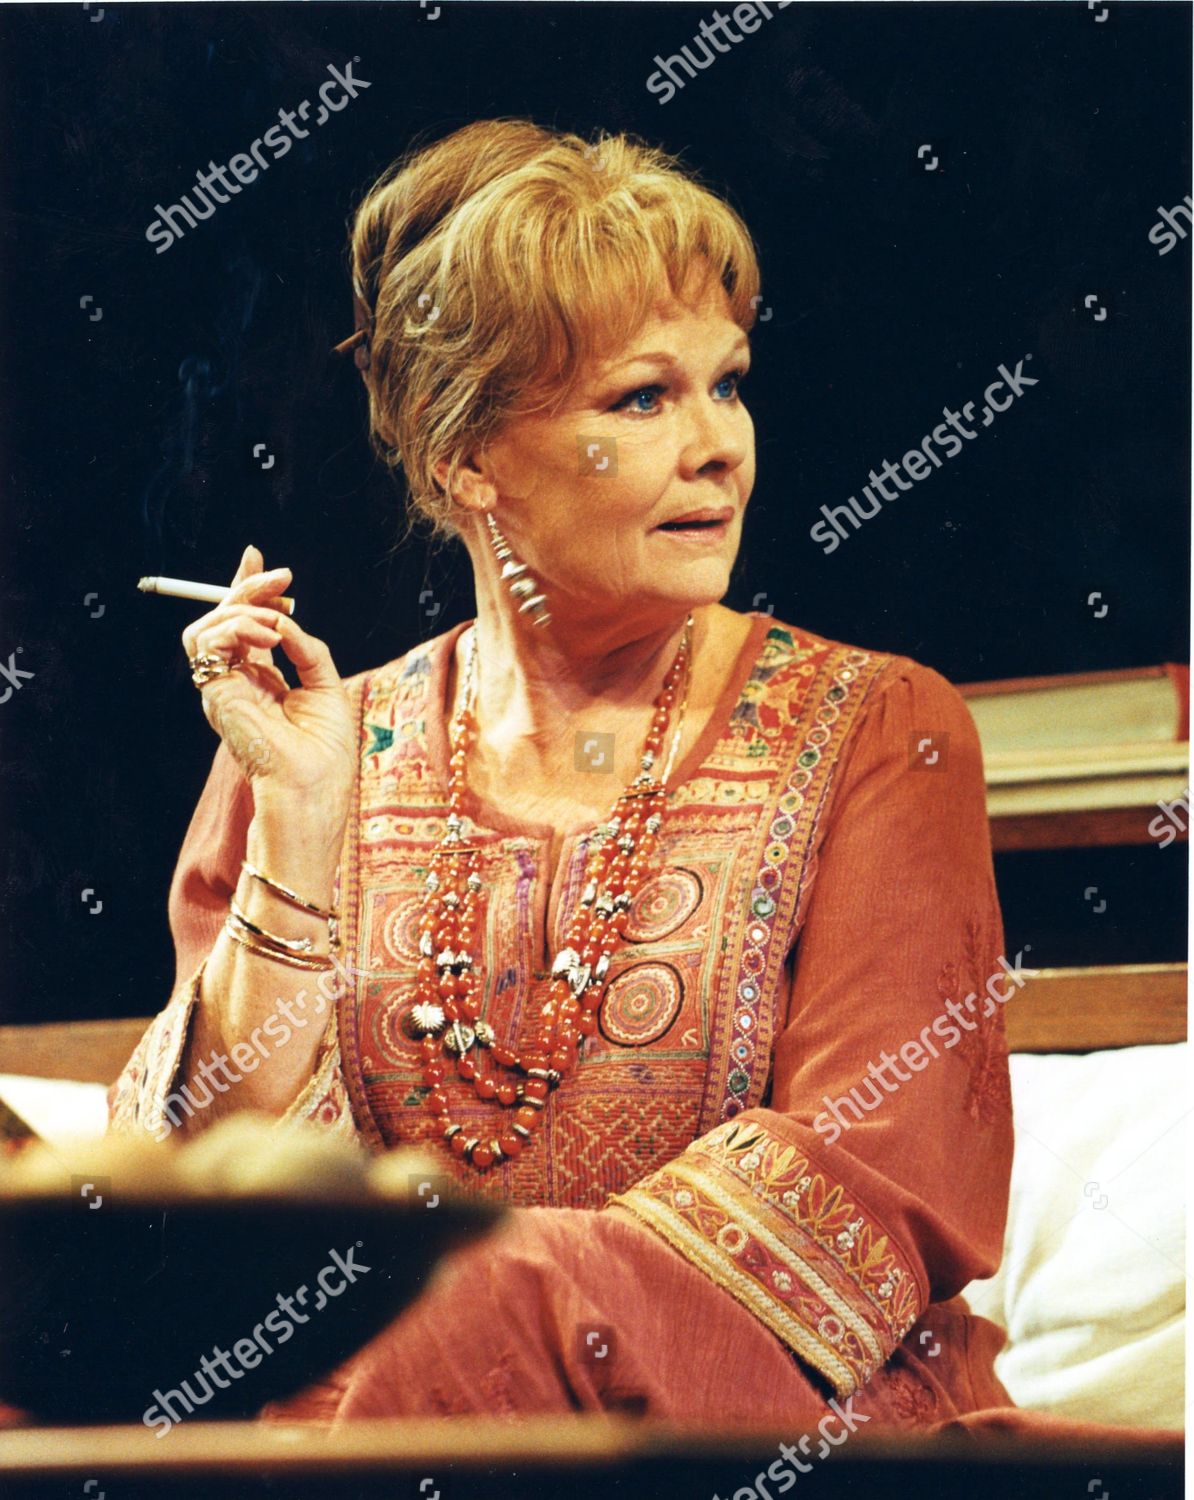 Judi Dench smoking a cigarette (or weed)
